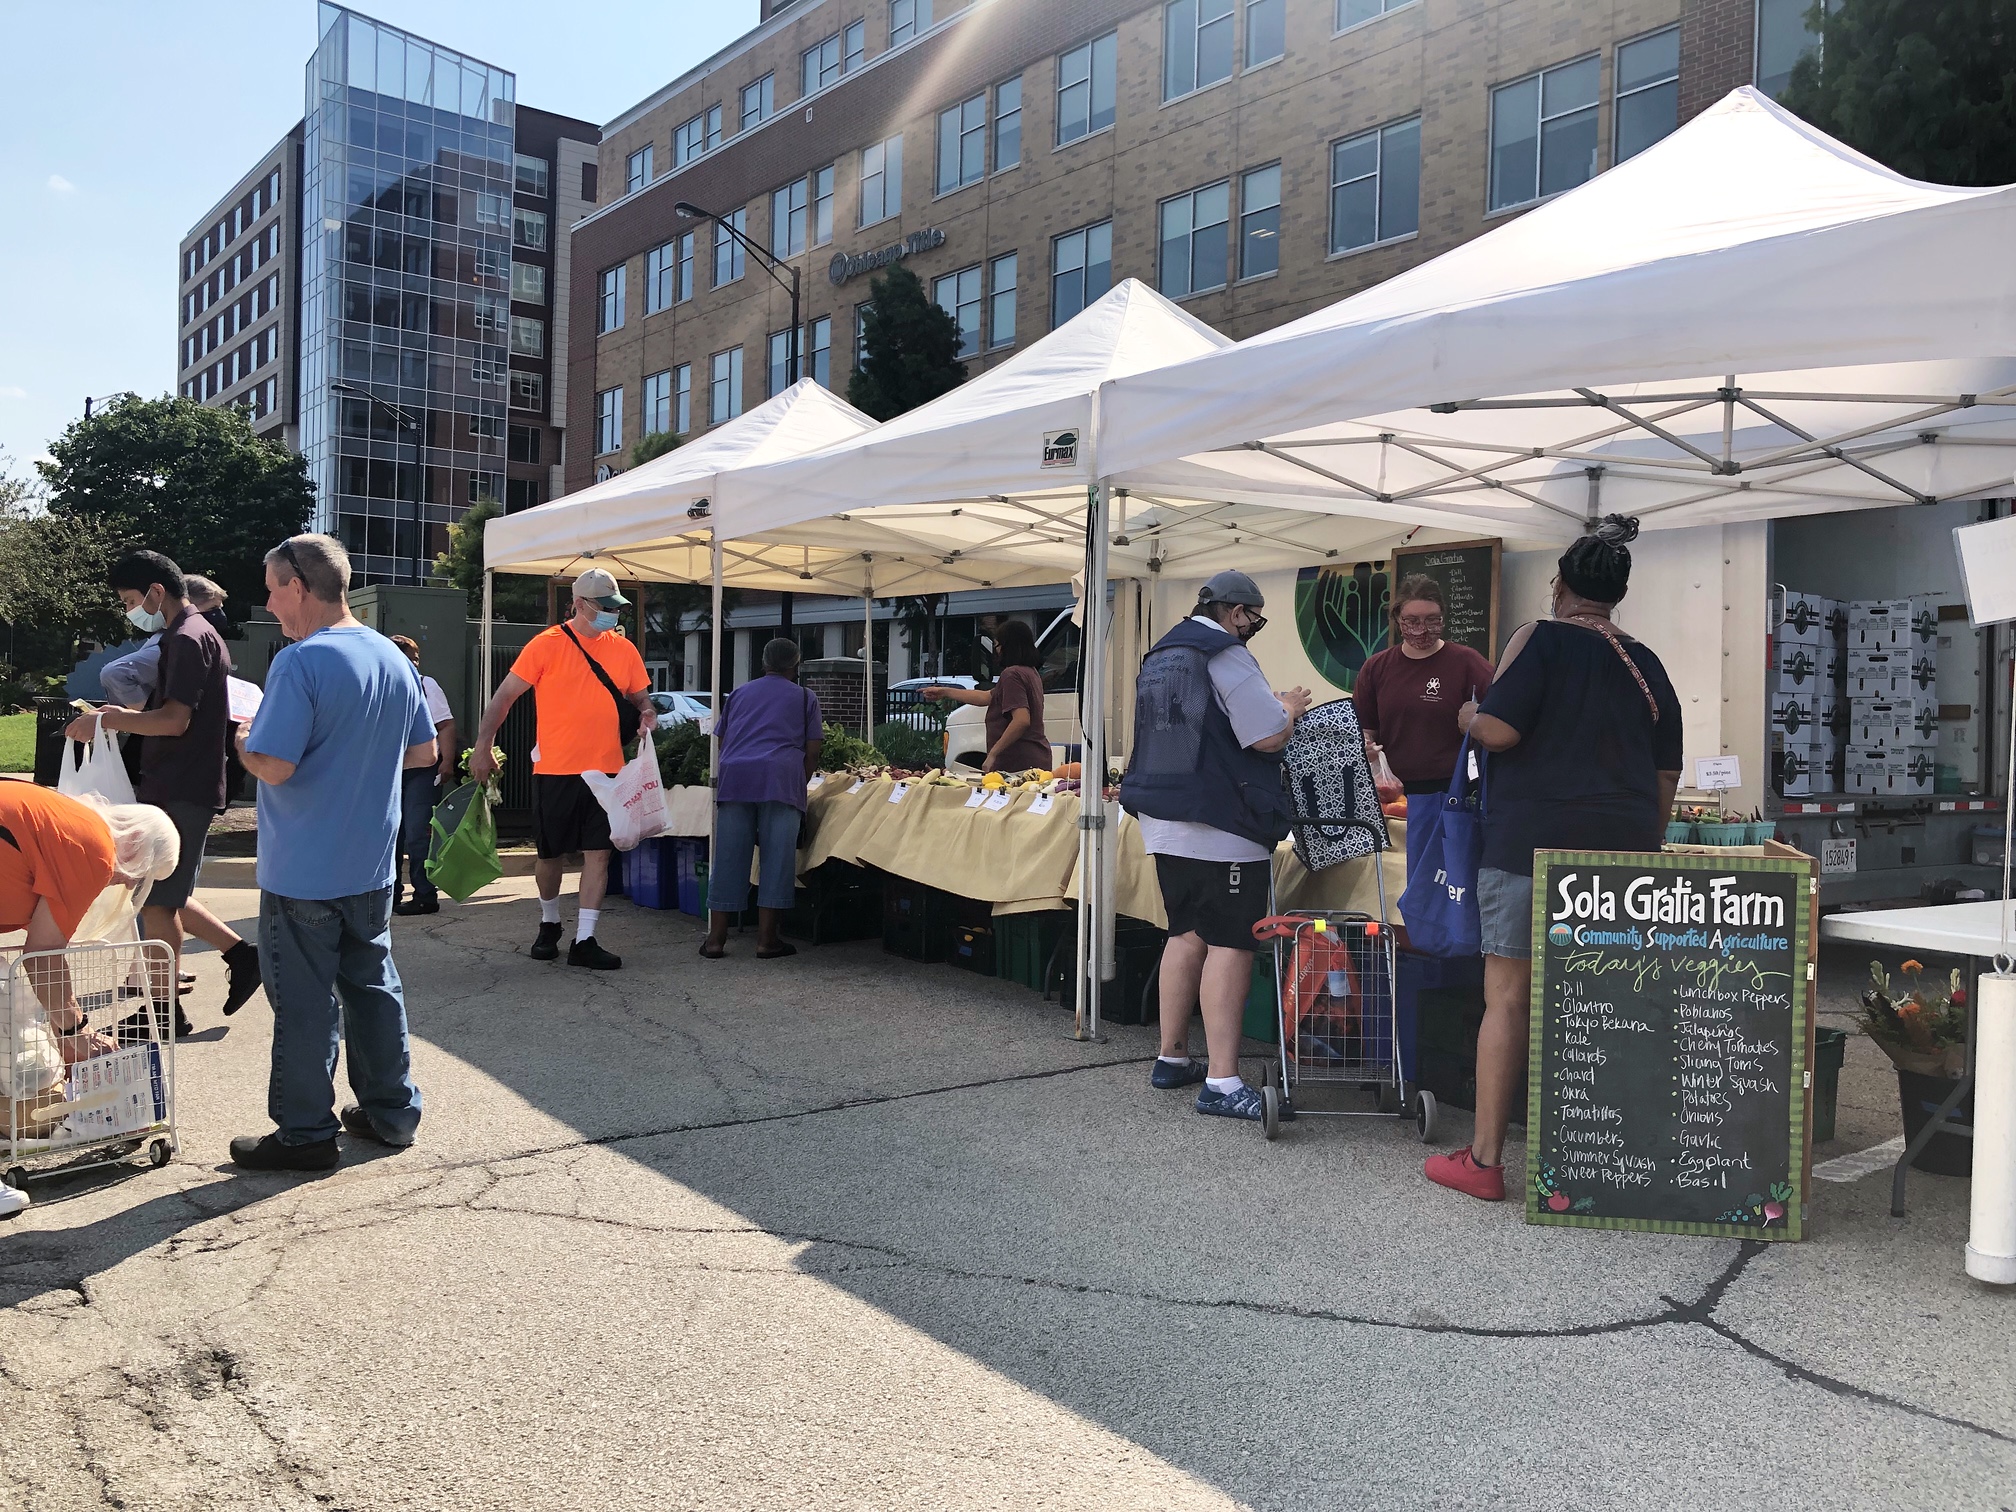 In the parking lot, the Champaign Farmers' Market vendors have tables under tents offering goods for sale. Masked and unmasked shoppers walk by, browse, and pay for goods with the Champaign skyline behind the tents on the right side of the photo. Photo by Alyssa Buckley.